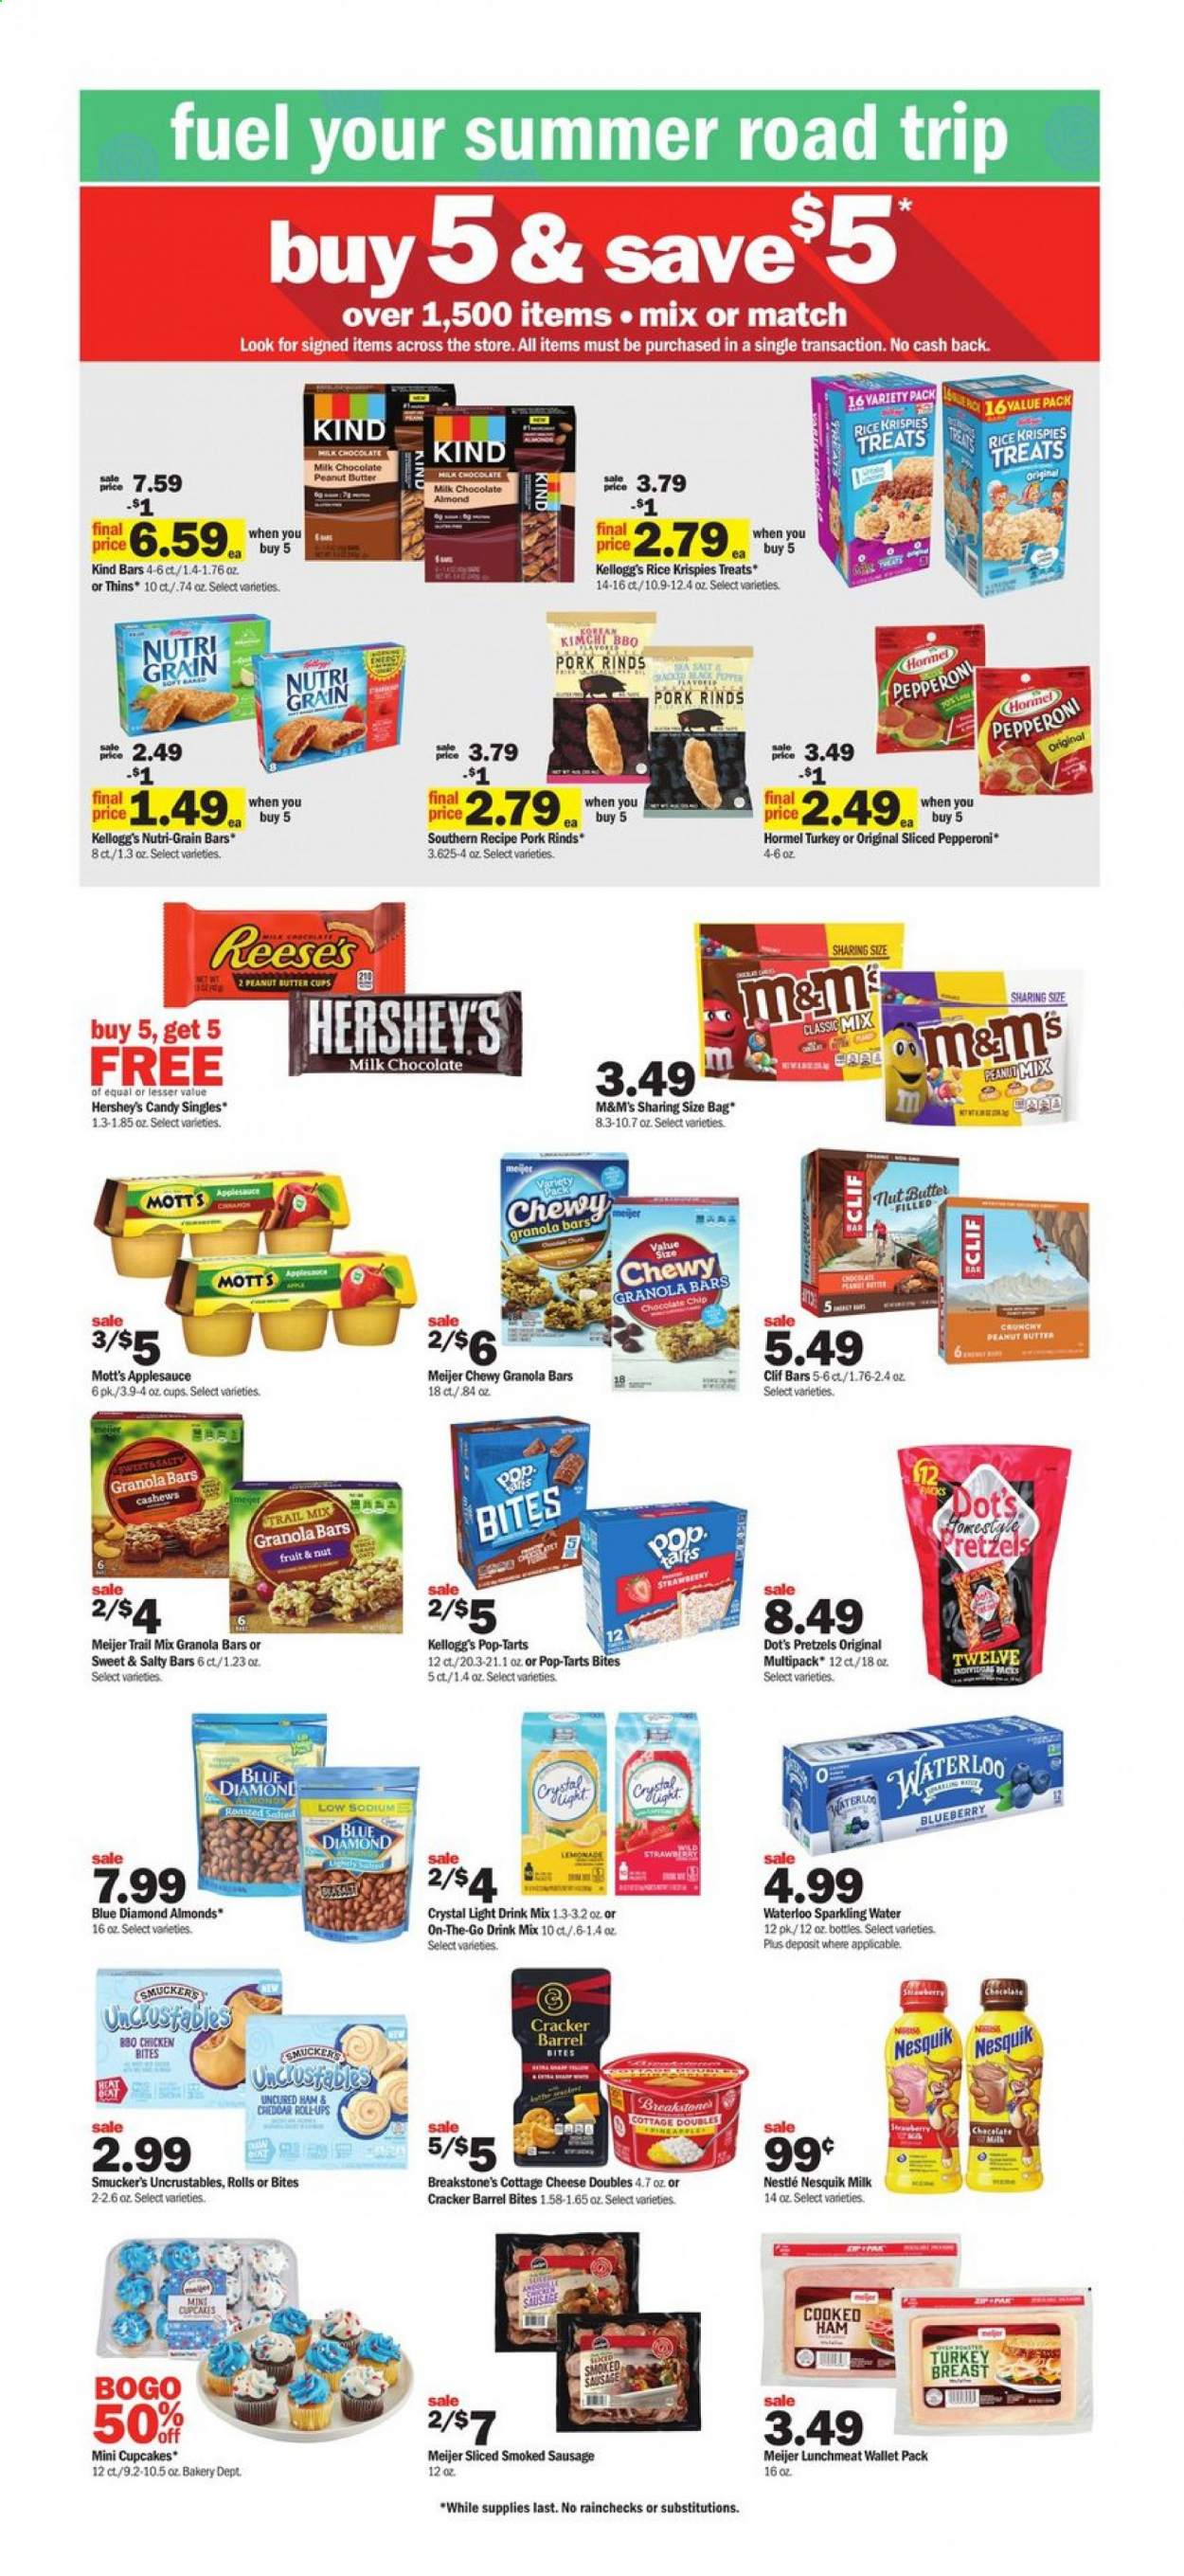 thumbnail - Meijer Flyer - 06/27/2021 - 07/03/2021 - Sales products - pretzels, cupcake, Mott's, Hormel, cooked ham, uncured ham, ham, sausage, smoked sausage, pepperoni, lunch meat, cottage cheese, cheese, Nesquik, Reese's, Hershey's, chicken bites, milk chocolate, Nestlé, chocolate chips, M&M's, crackers, Kellogg's, peanut butter cups, Pop-Tarts, Nutri-Grain bars, Thins, granola bar, Rice Krispies, Nutri-Grain, apple sauce, nut butter, almonds, cashews, Blue Diamond, trail mix, lemonade, sparkling water, turkey breast, pan, straw, bag. Page 6.